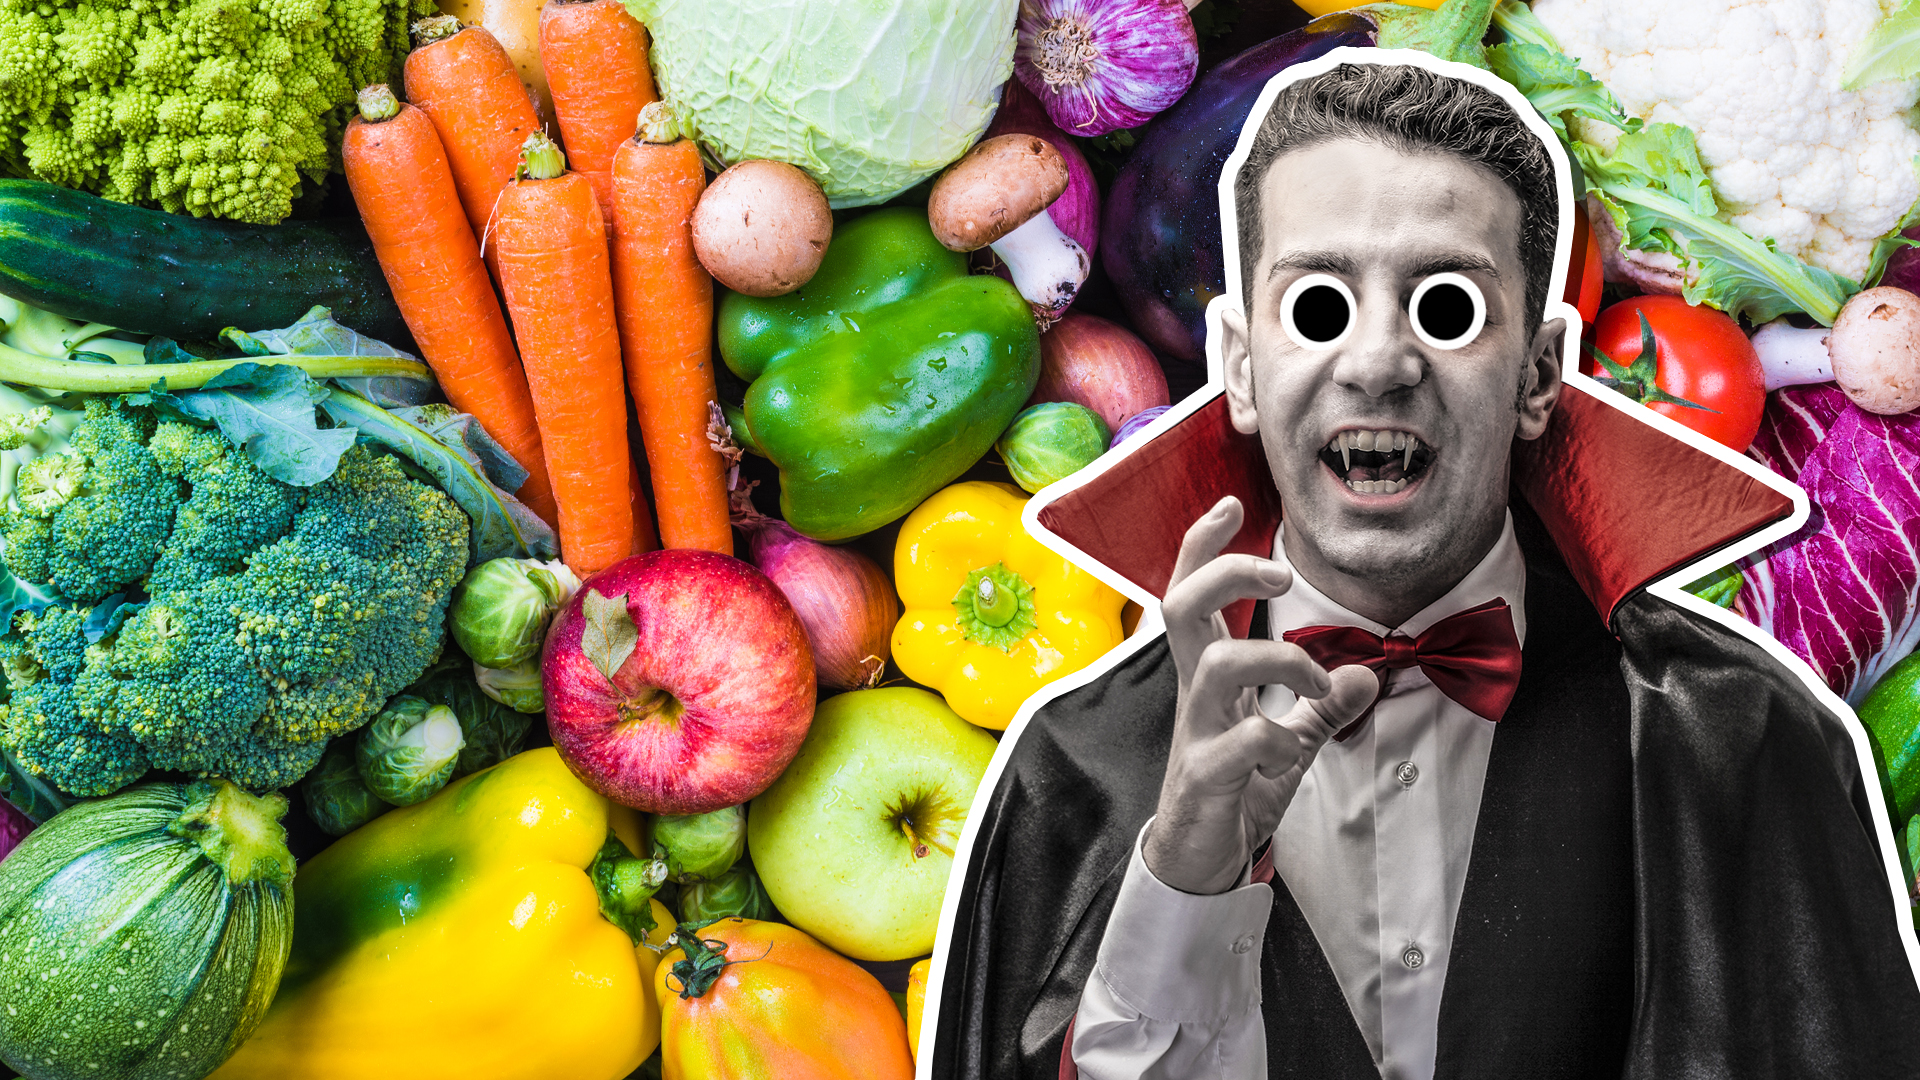 A selection of vegetables and a vampire